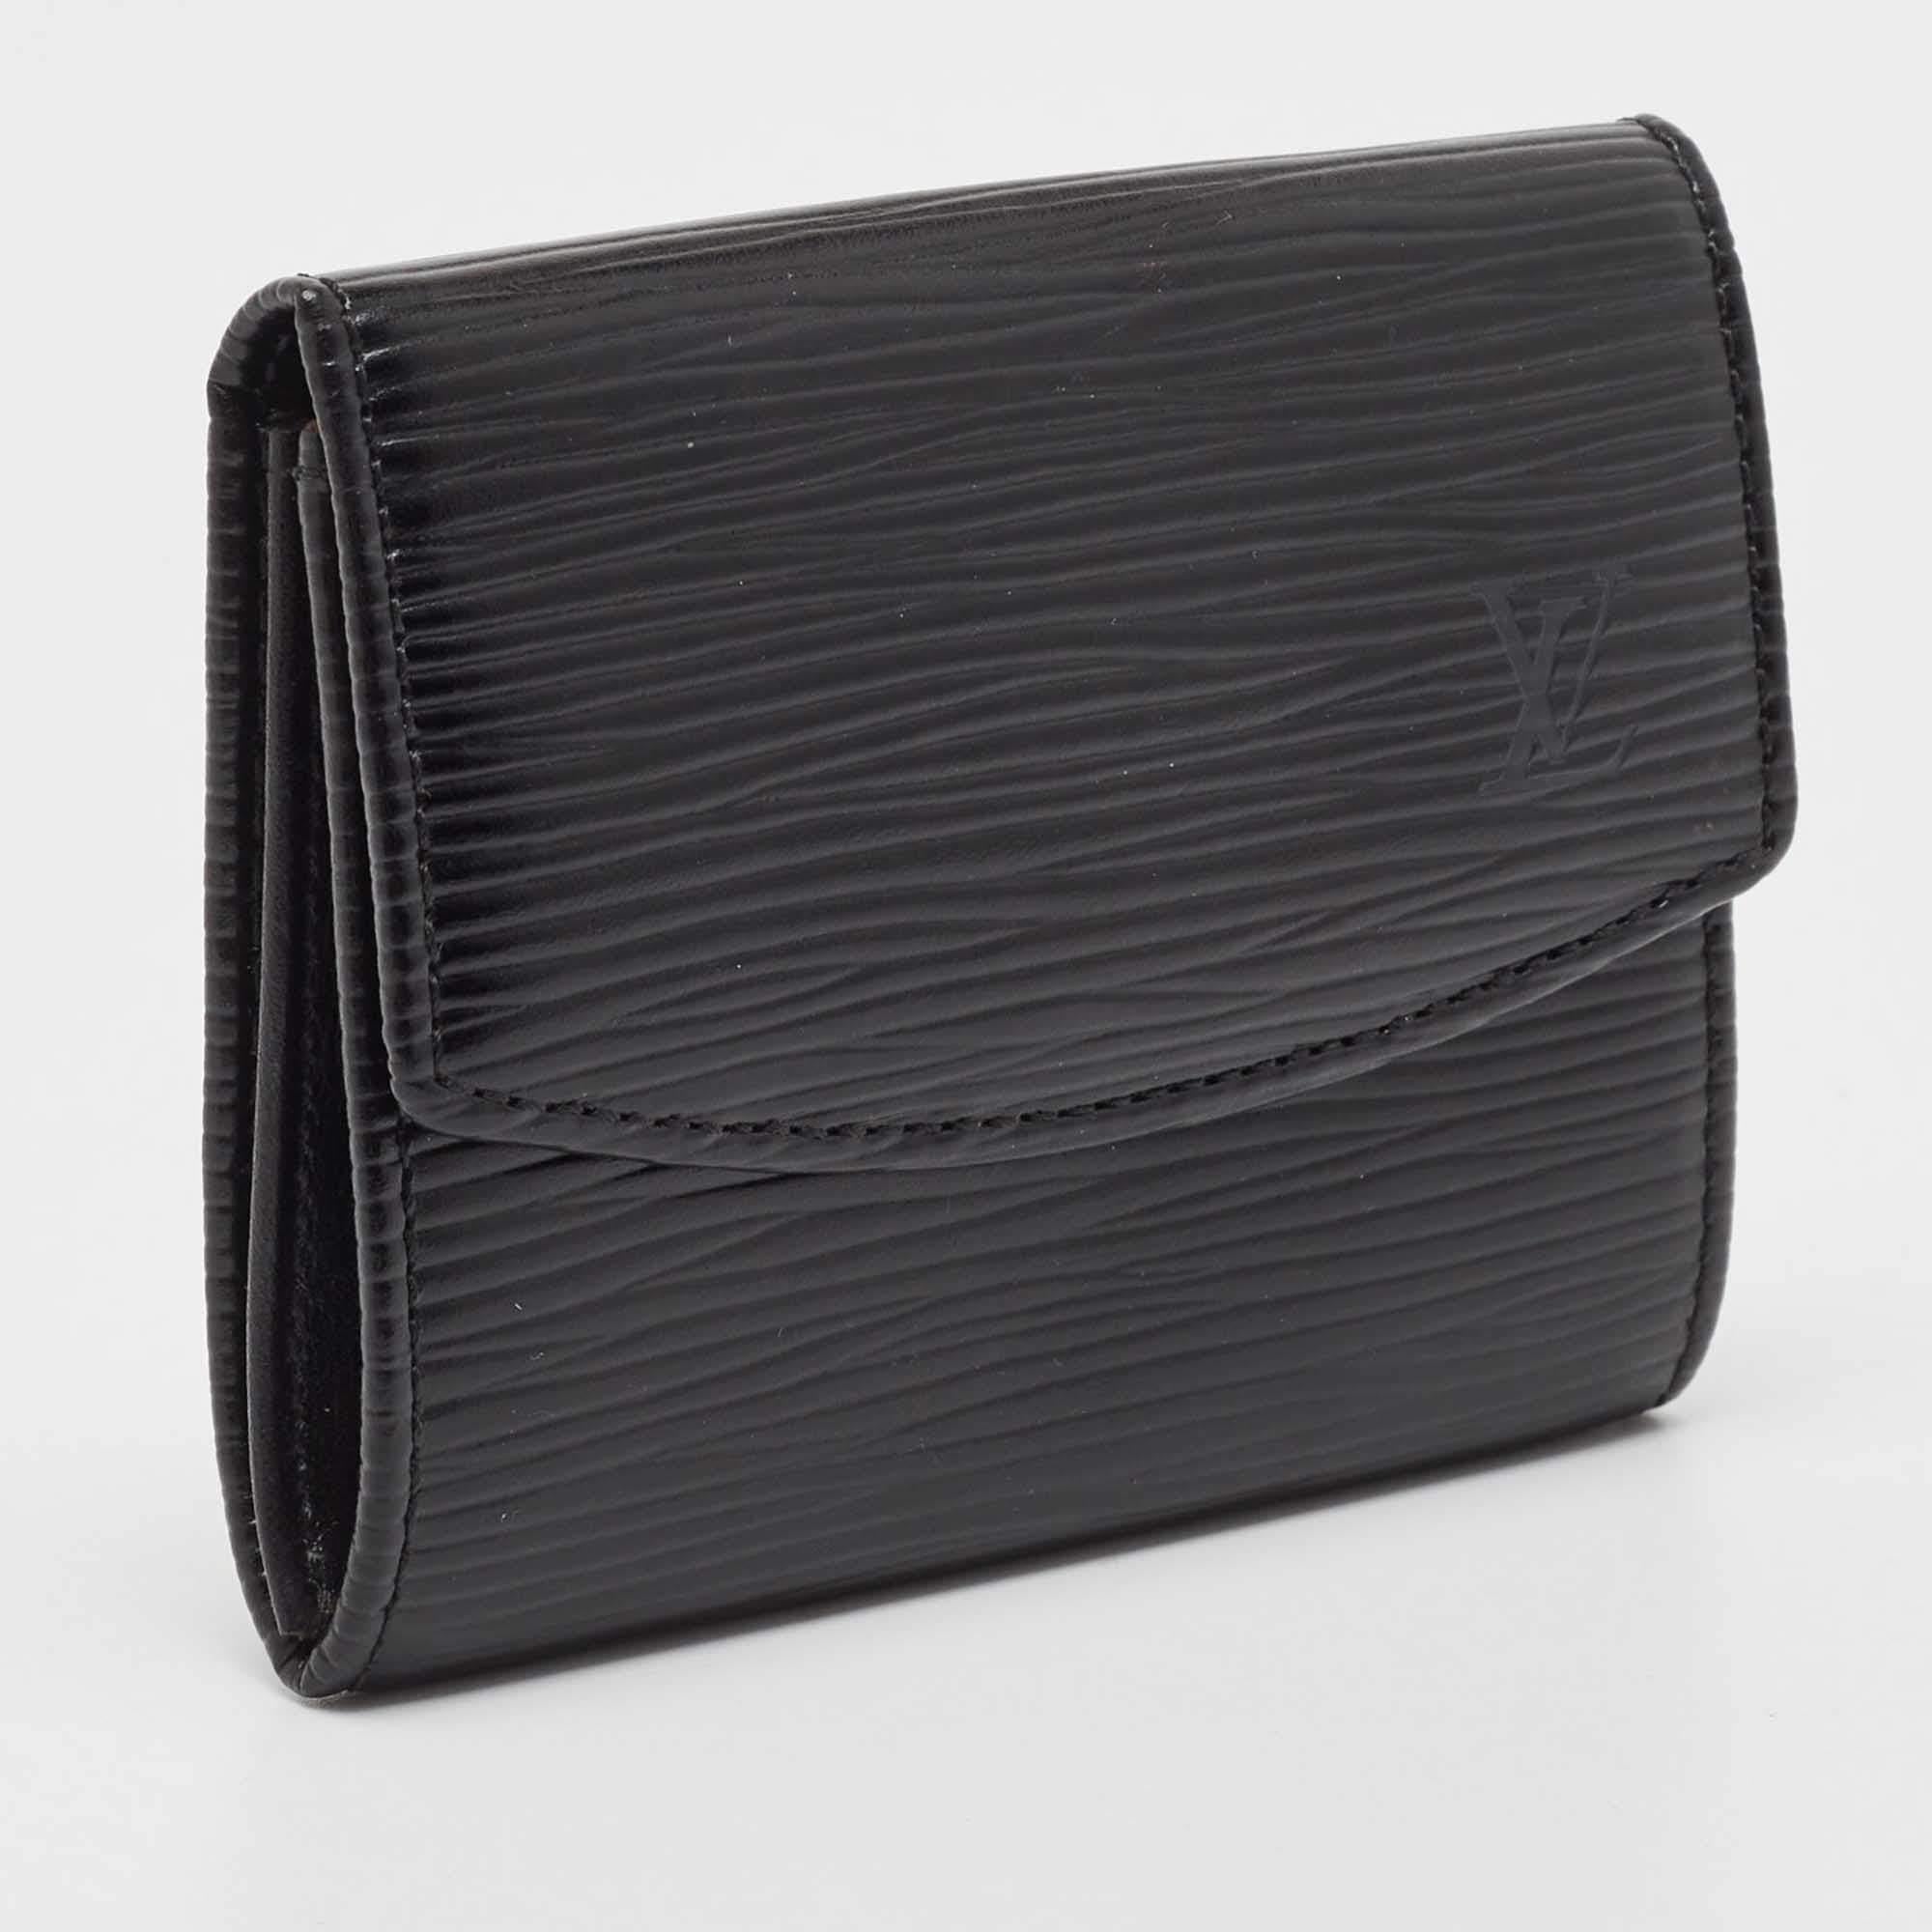 The LV cardholder combines elegance and functionality in a sleek design. Crafted from leather, it features a black shade that adds a touch of sophistication.

